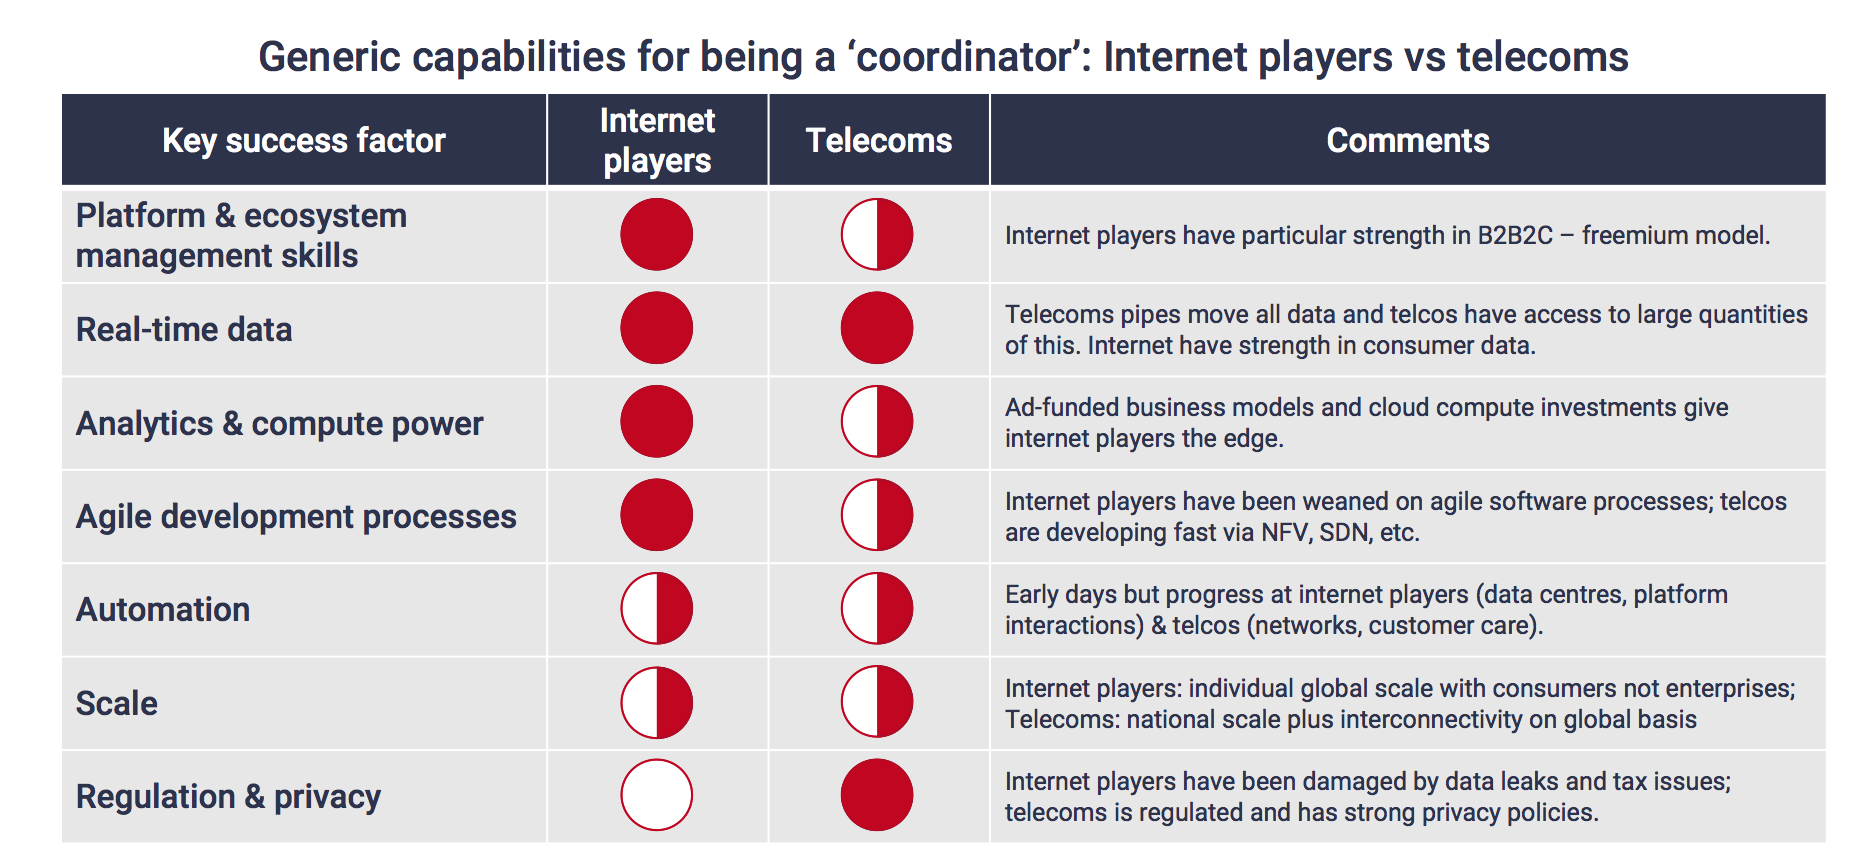 Generic capabilities for being a ‘coordinator’- Internet players vs telecoms